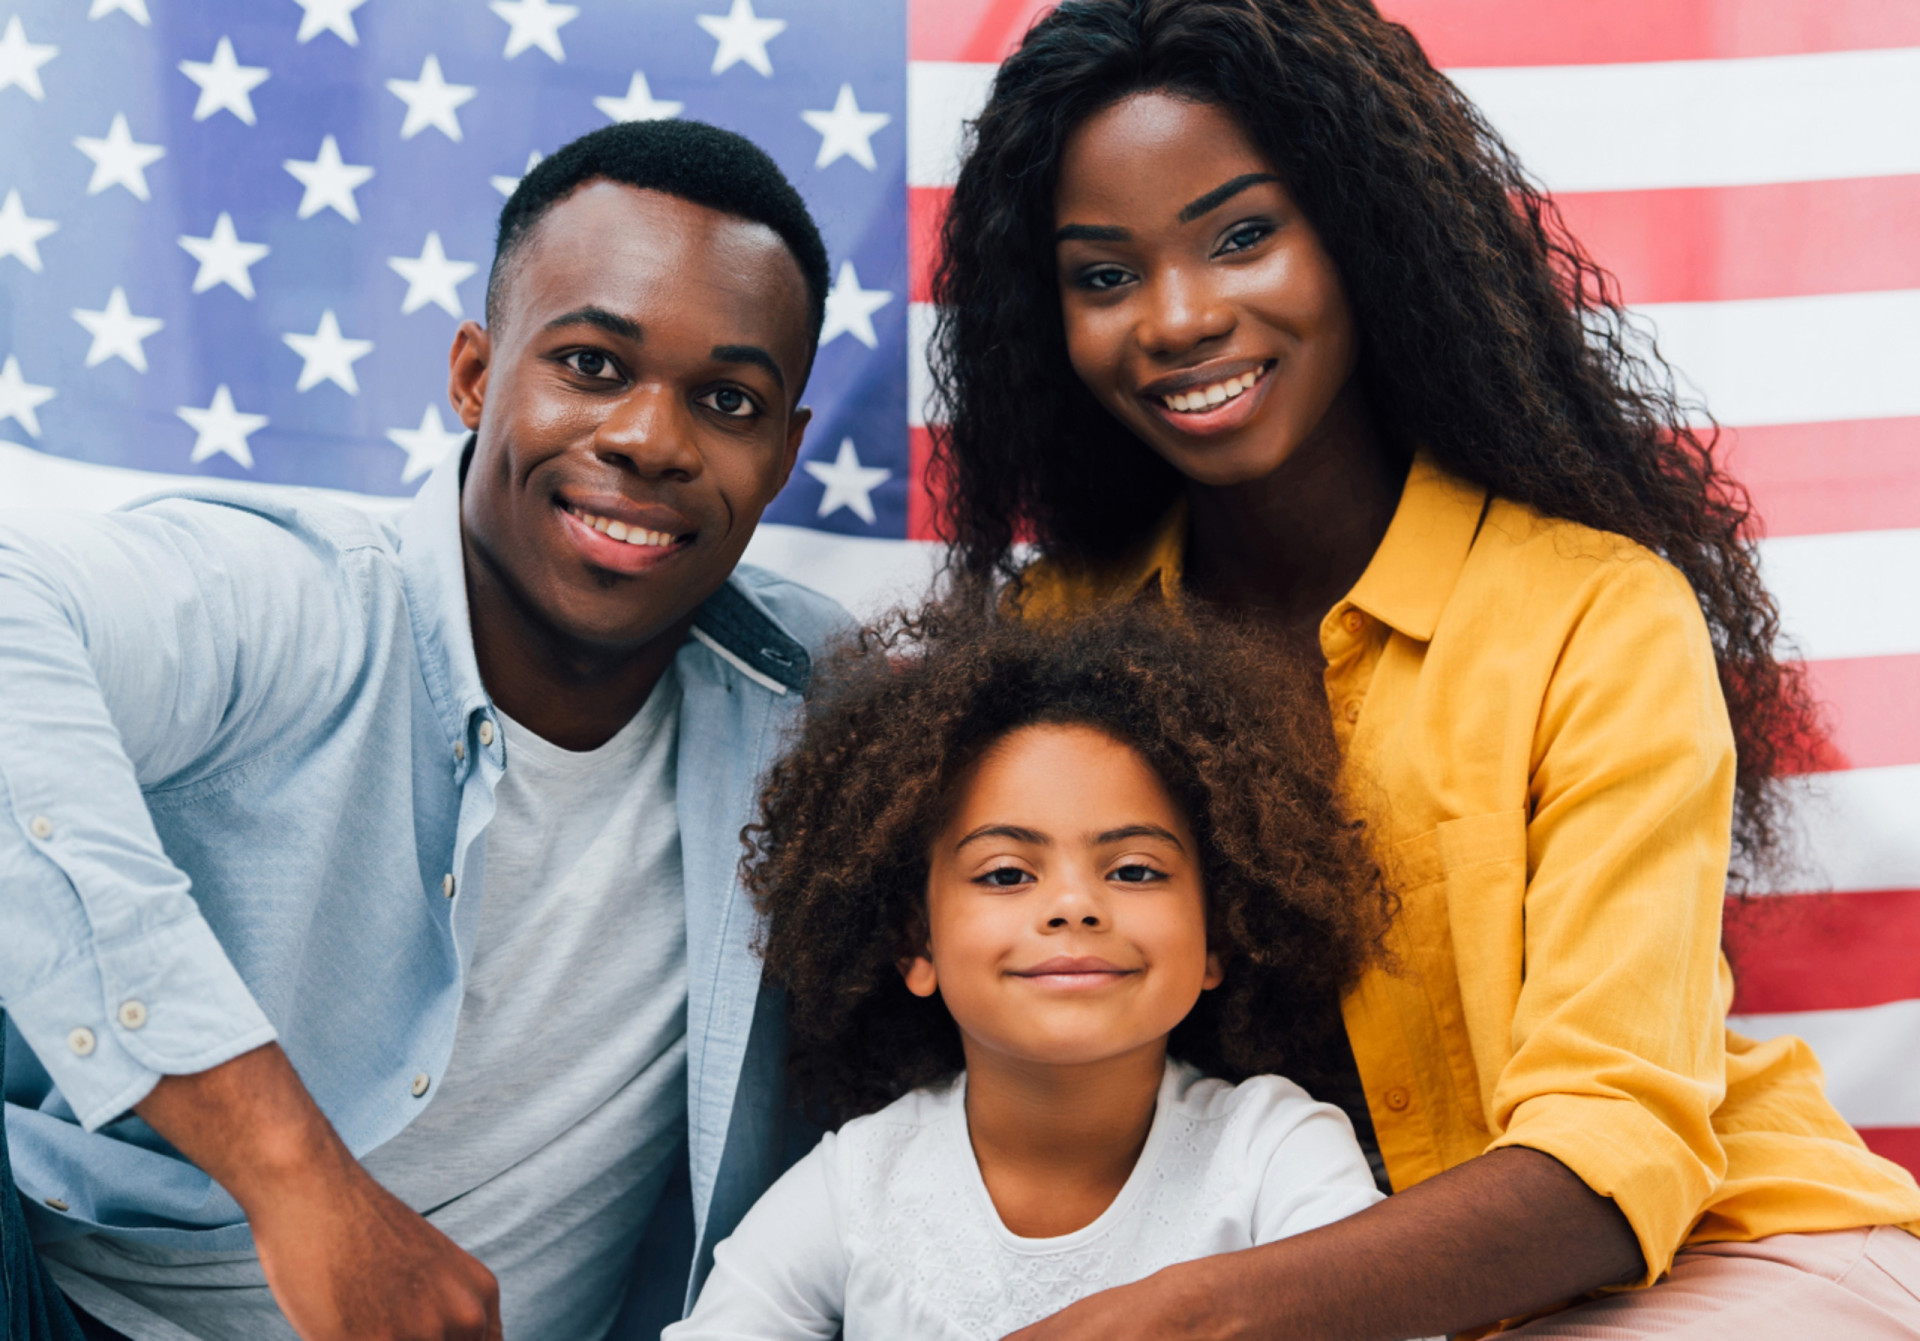 <p>A number of other categories exist through which it's possible to apply for an American green card. These include the Diversity Immigrant Visa Program and eligibility as an American Indian born in Canada.</p><p><a href="https://www.msn.com/en-us/community/channel/vid-7xx8mnucu55yw63we9va2gwr7uihbxwc68fxqp25x6tg4ftibpra?cvid=94631541bc0f4f89bfd59158d696ad7e">Follow us and access great exclusive content every day</a></p>